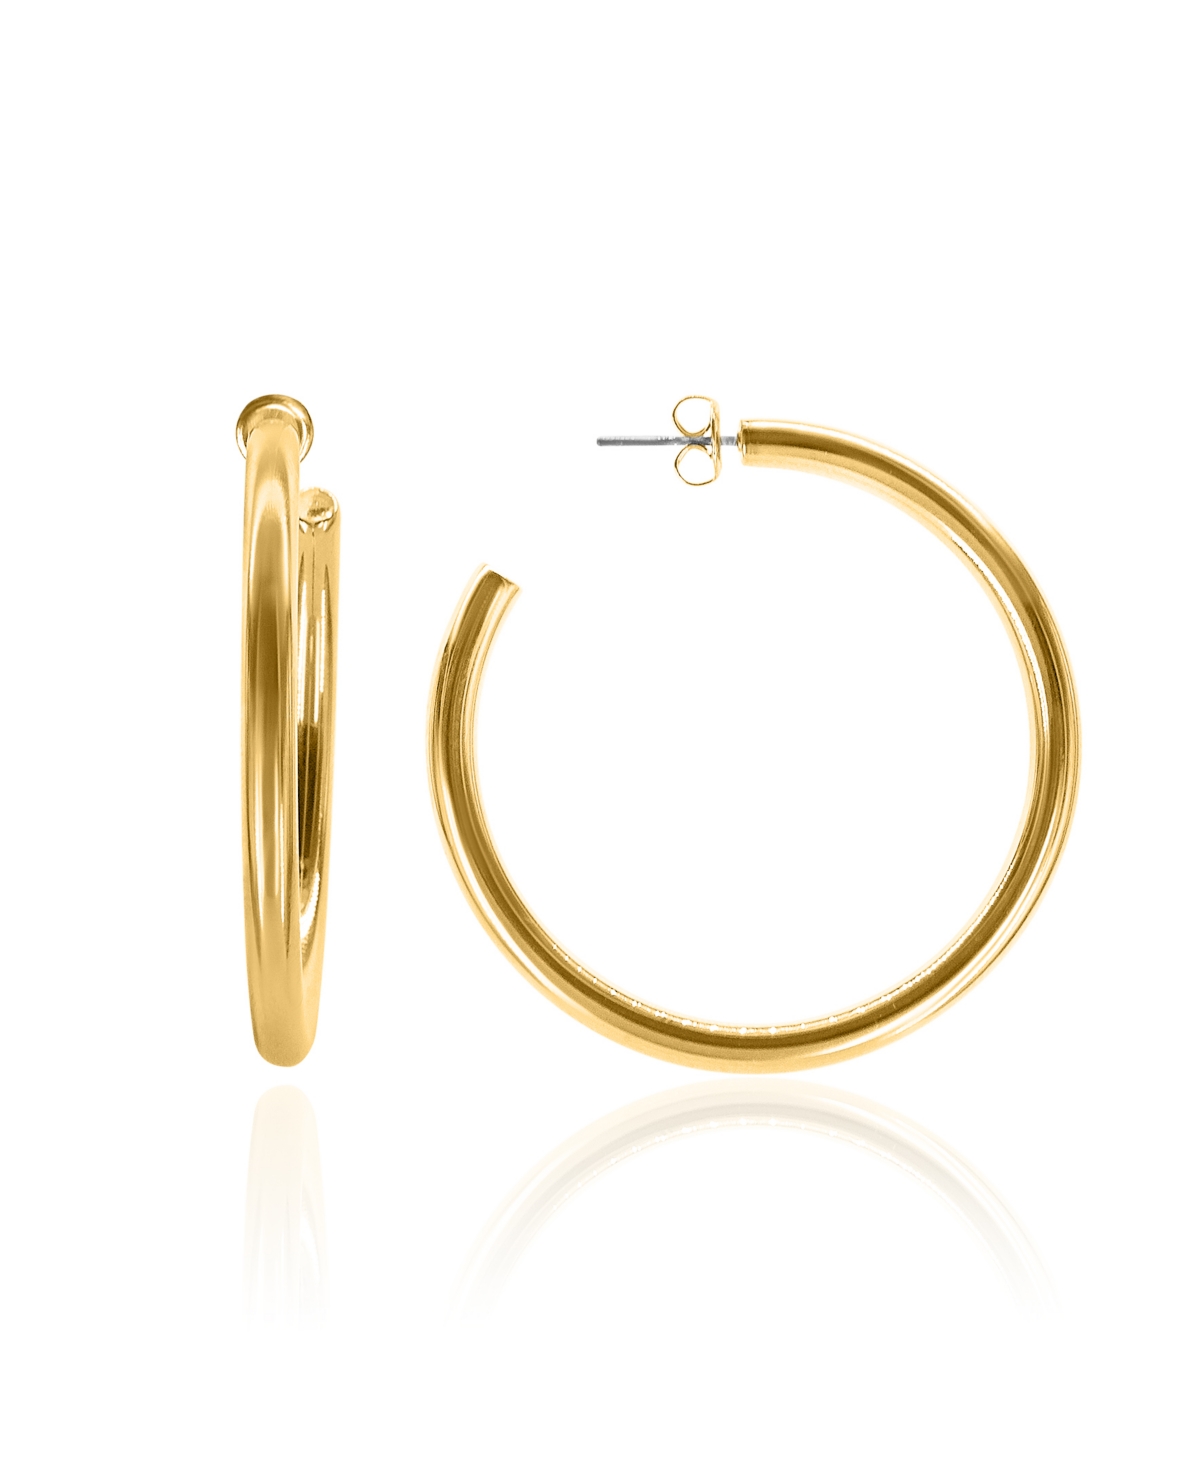 Liv 2 1/3" Large Hoops in 18k Gold- Plated Brass, 60mm - Gold